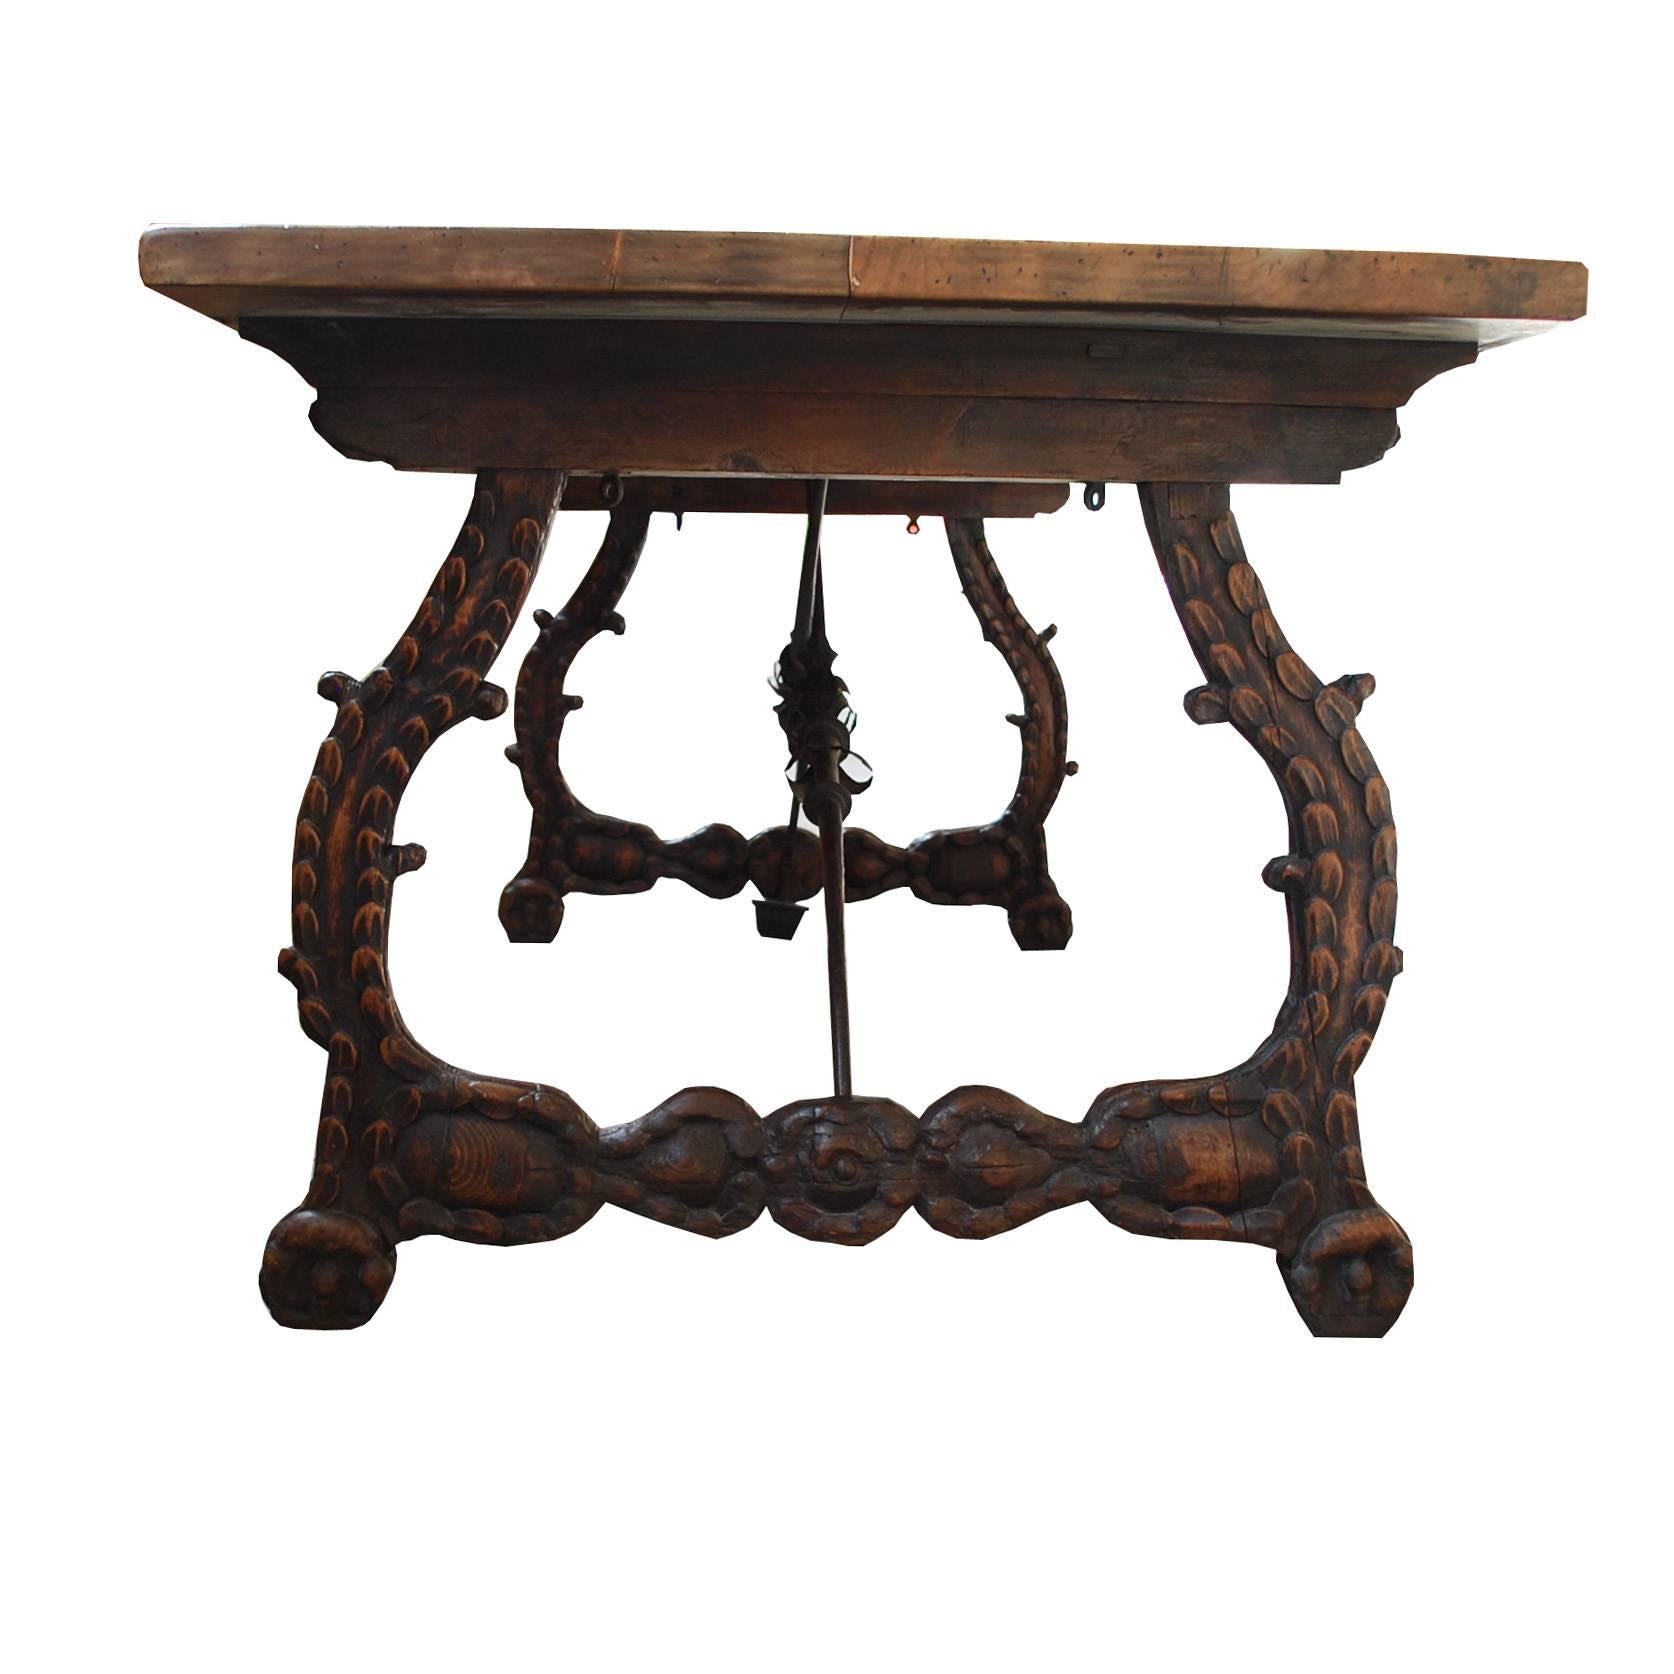 Antique Spanish table with 17th century wrought iron and walnut wood base with 19th century restored top.
Originates Spain, dating circa 1750.
(Shipping costs on request, depends on destination).